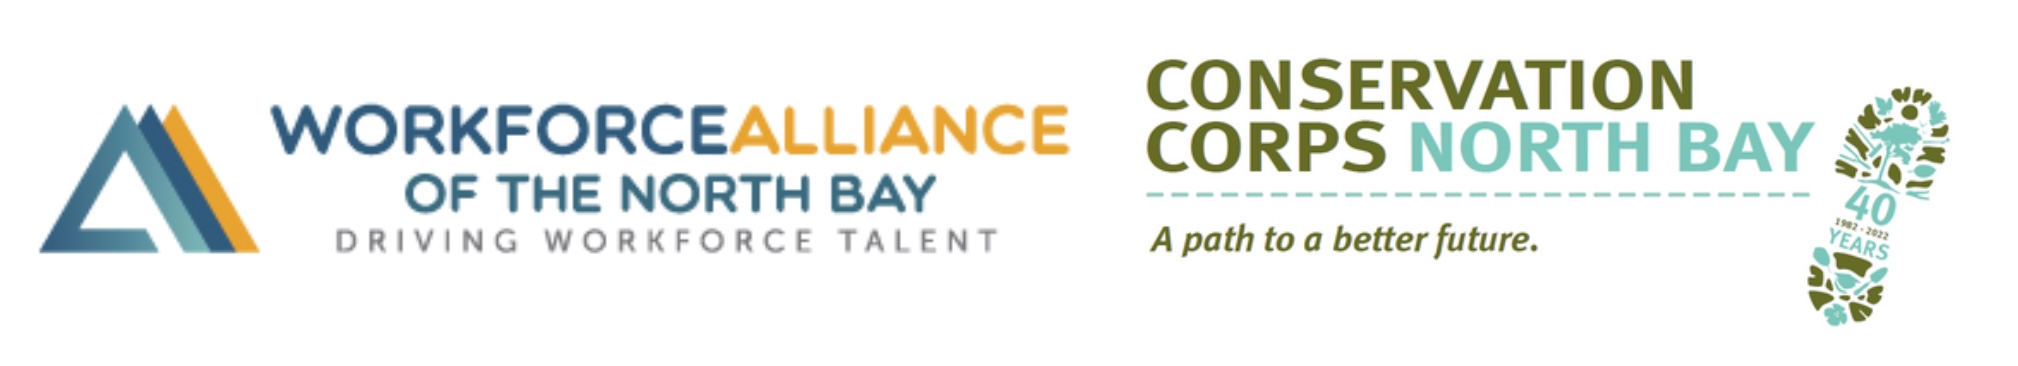 workforce alliance logo and conservation corps logo